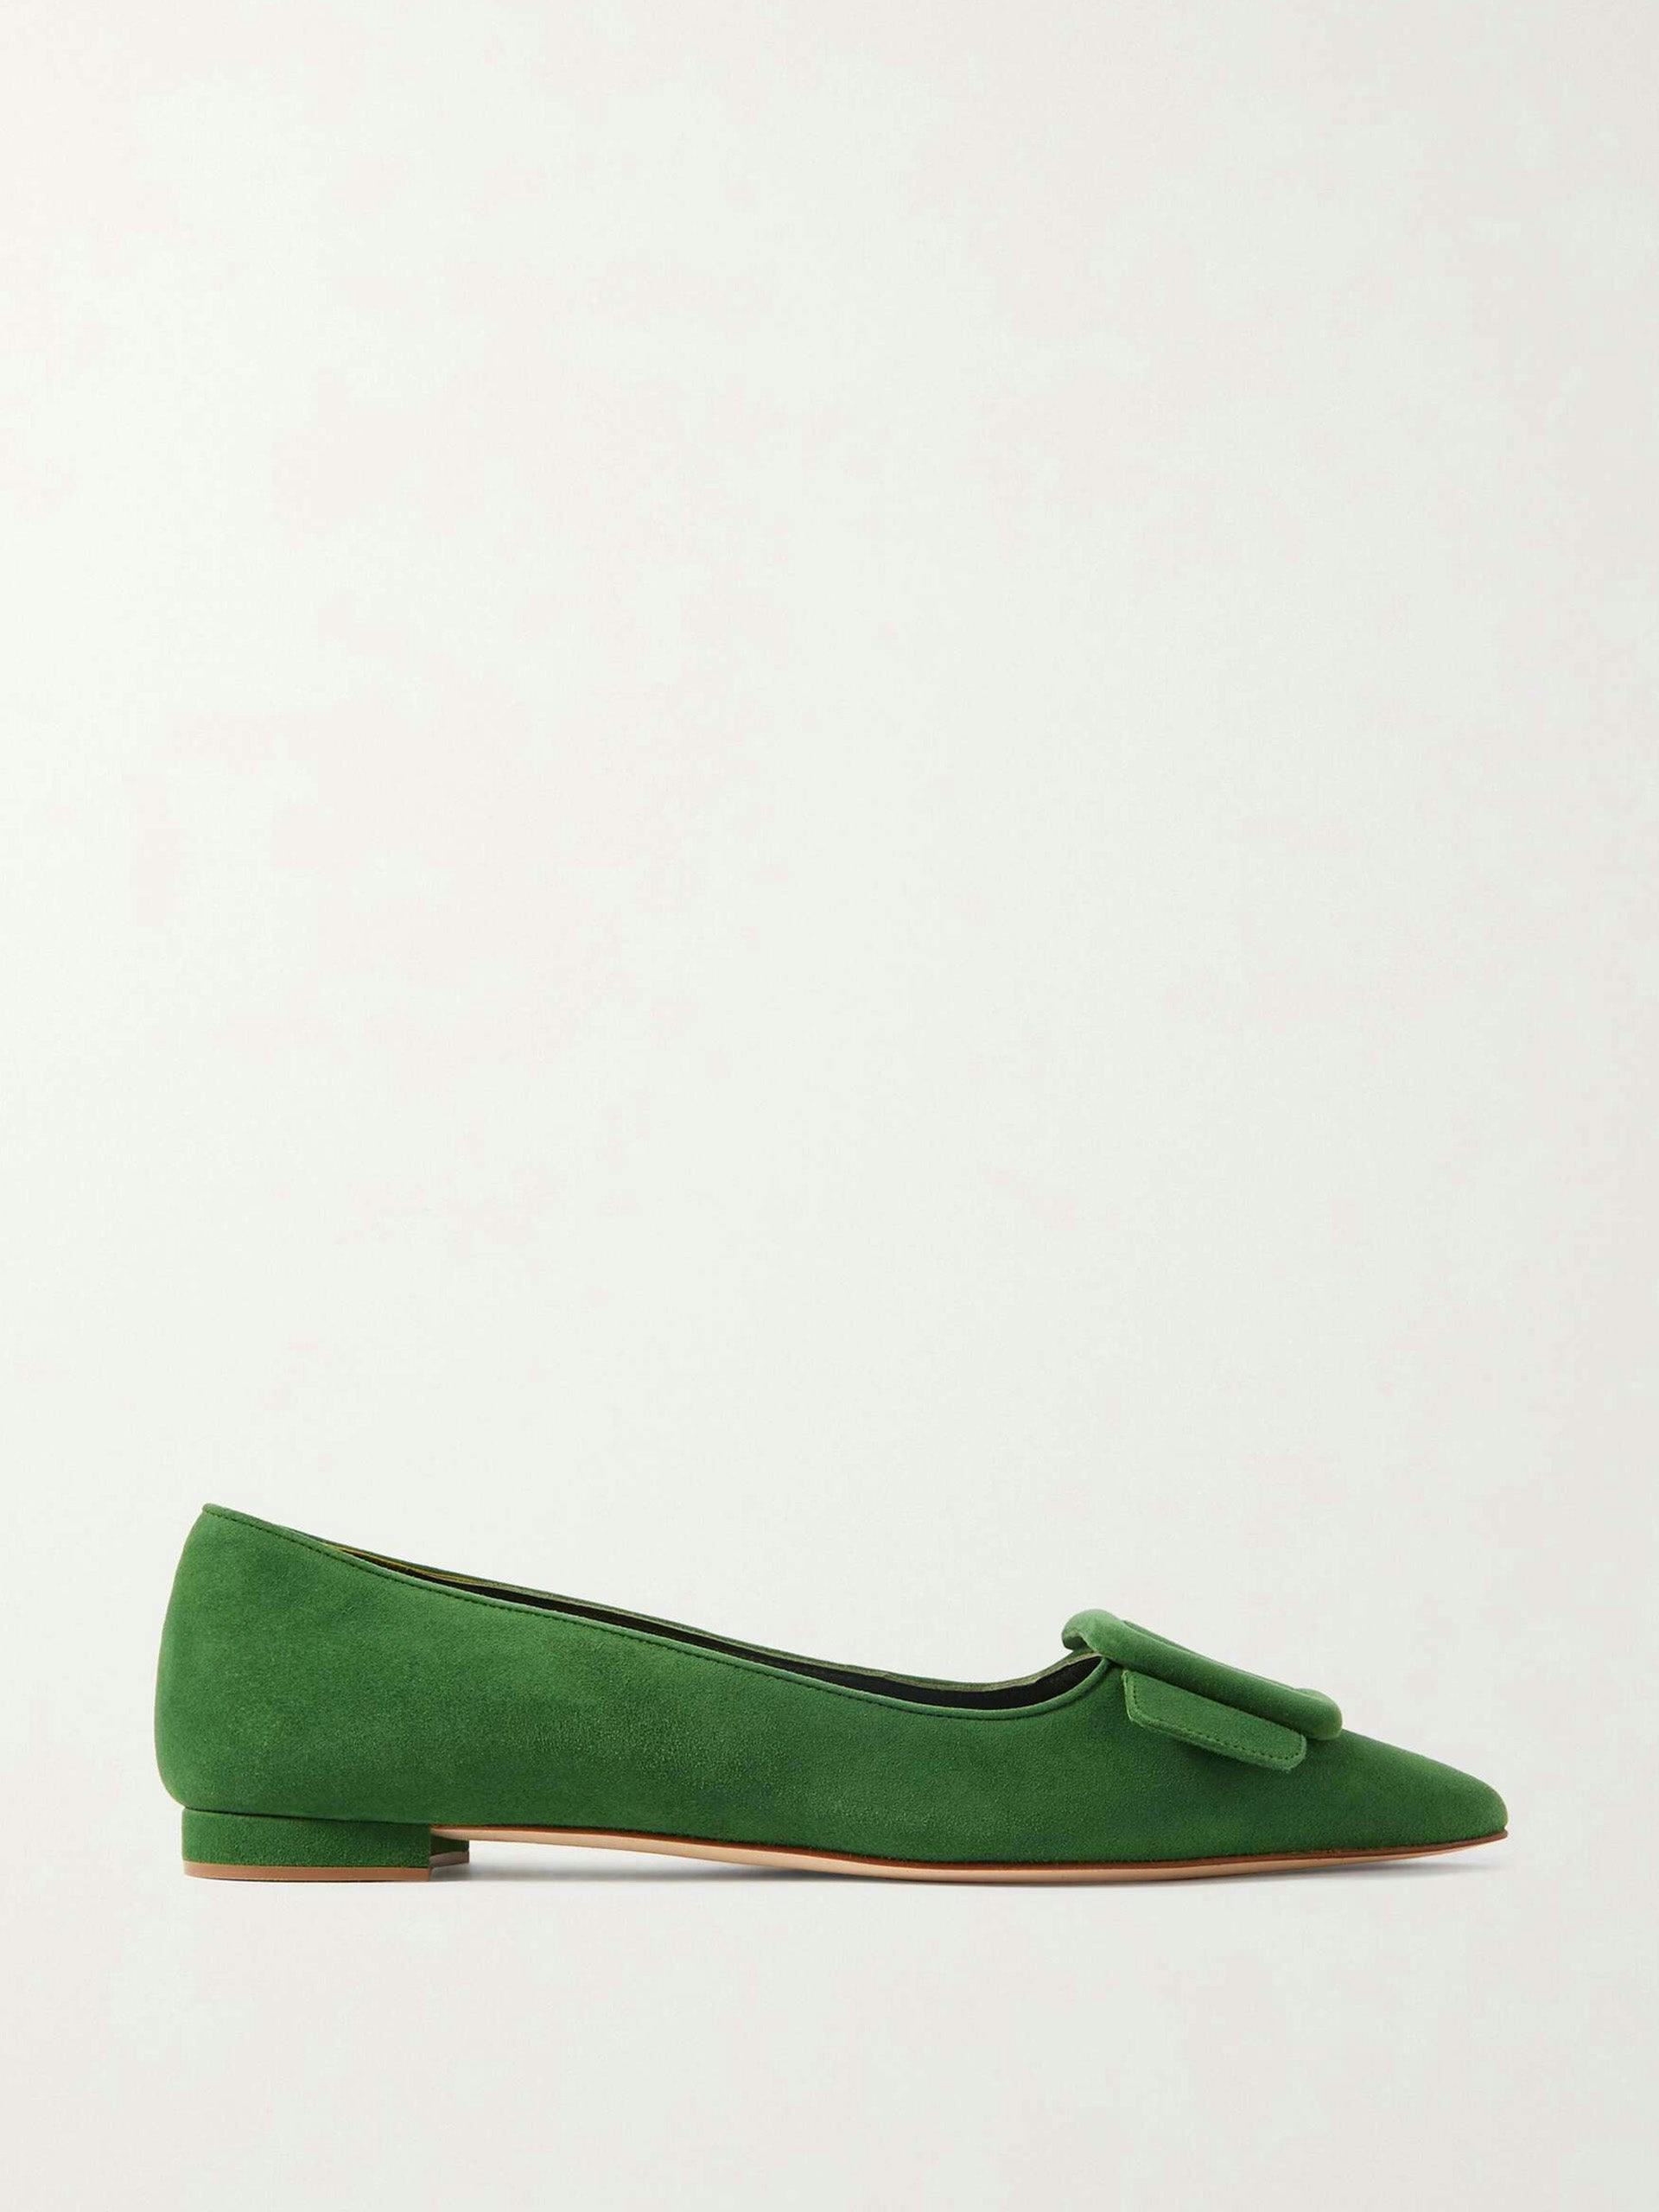 Maysale suede point-toe flats